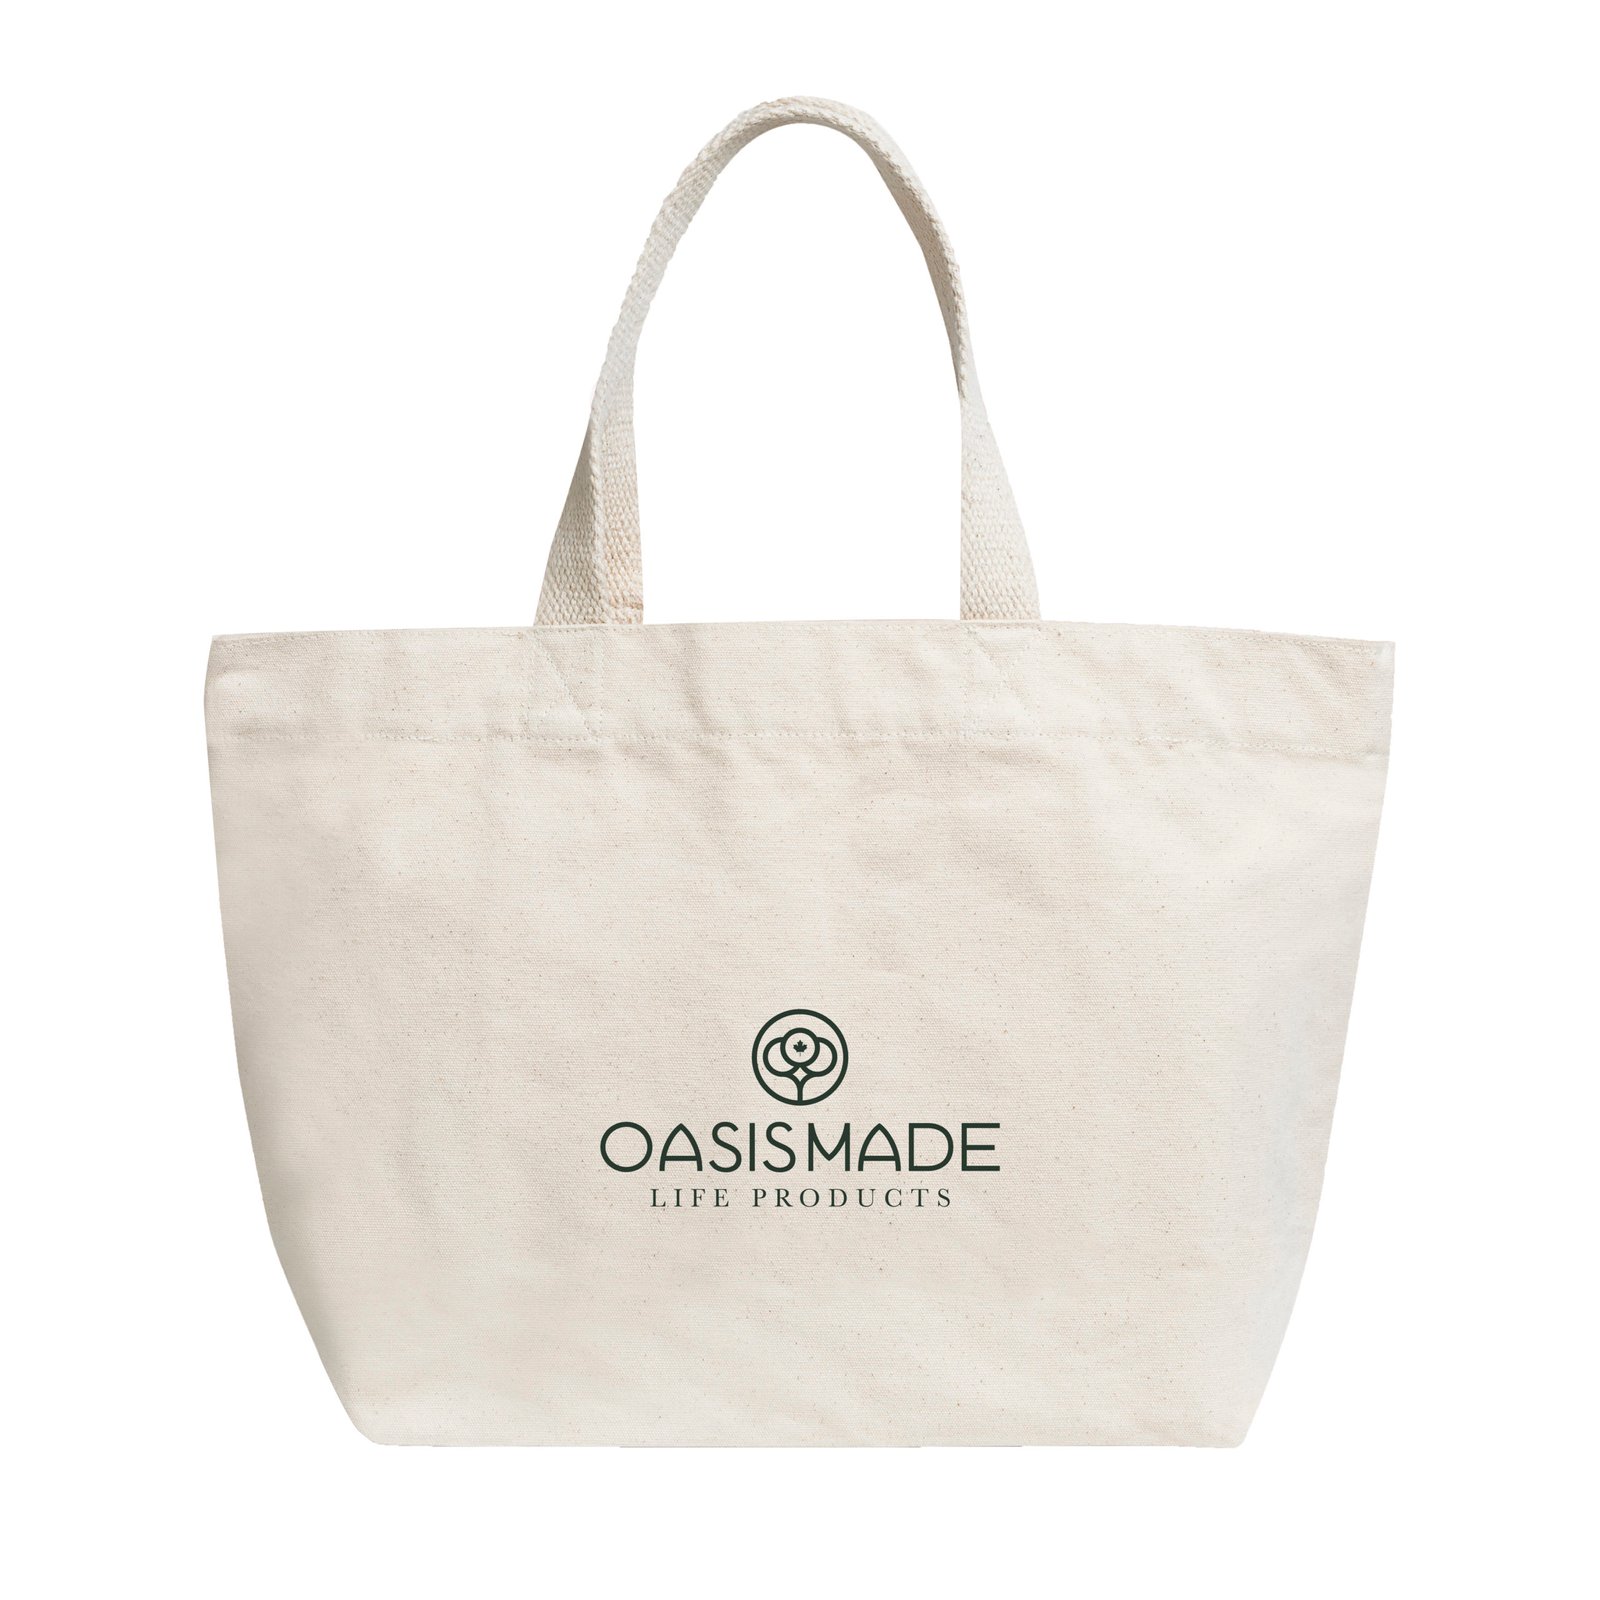 Quality Heavy Duty Canvas Totes in India | Ramesh Exports